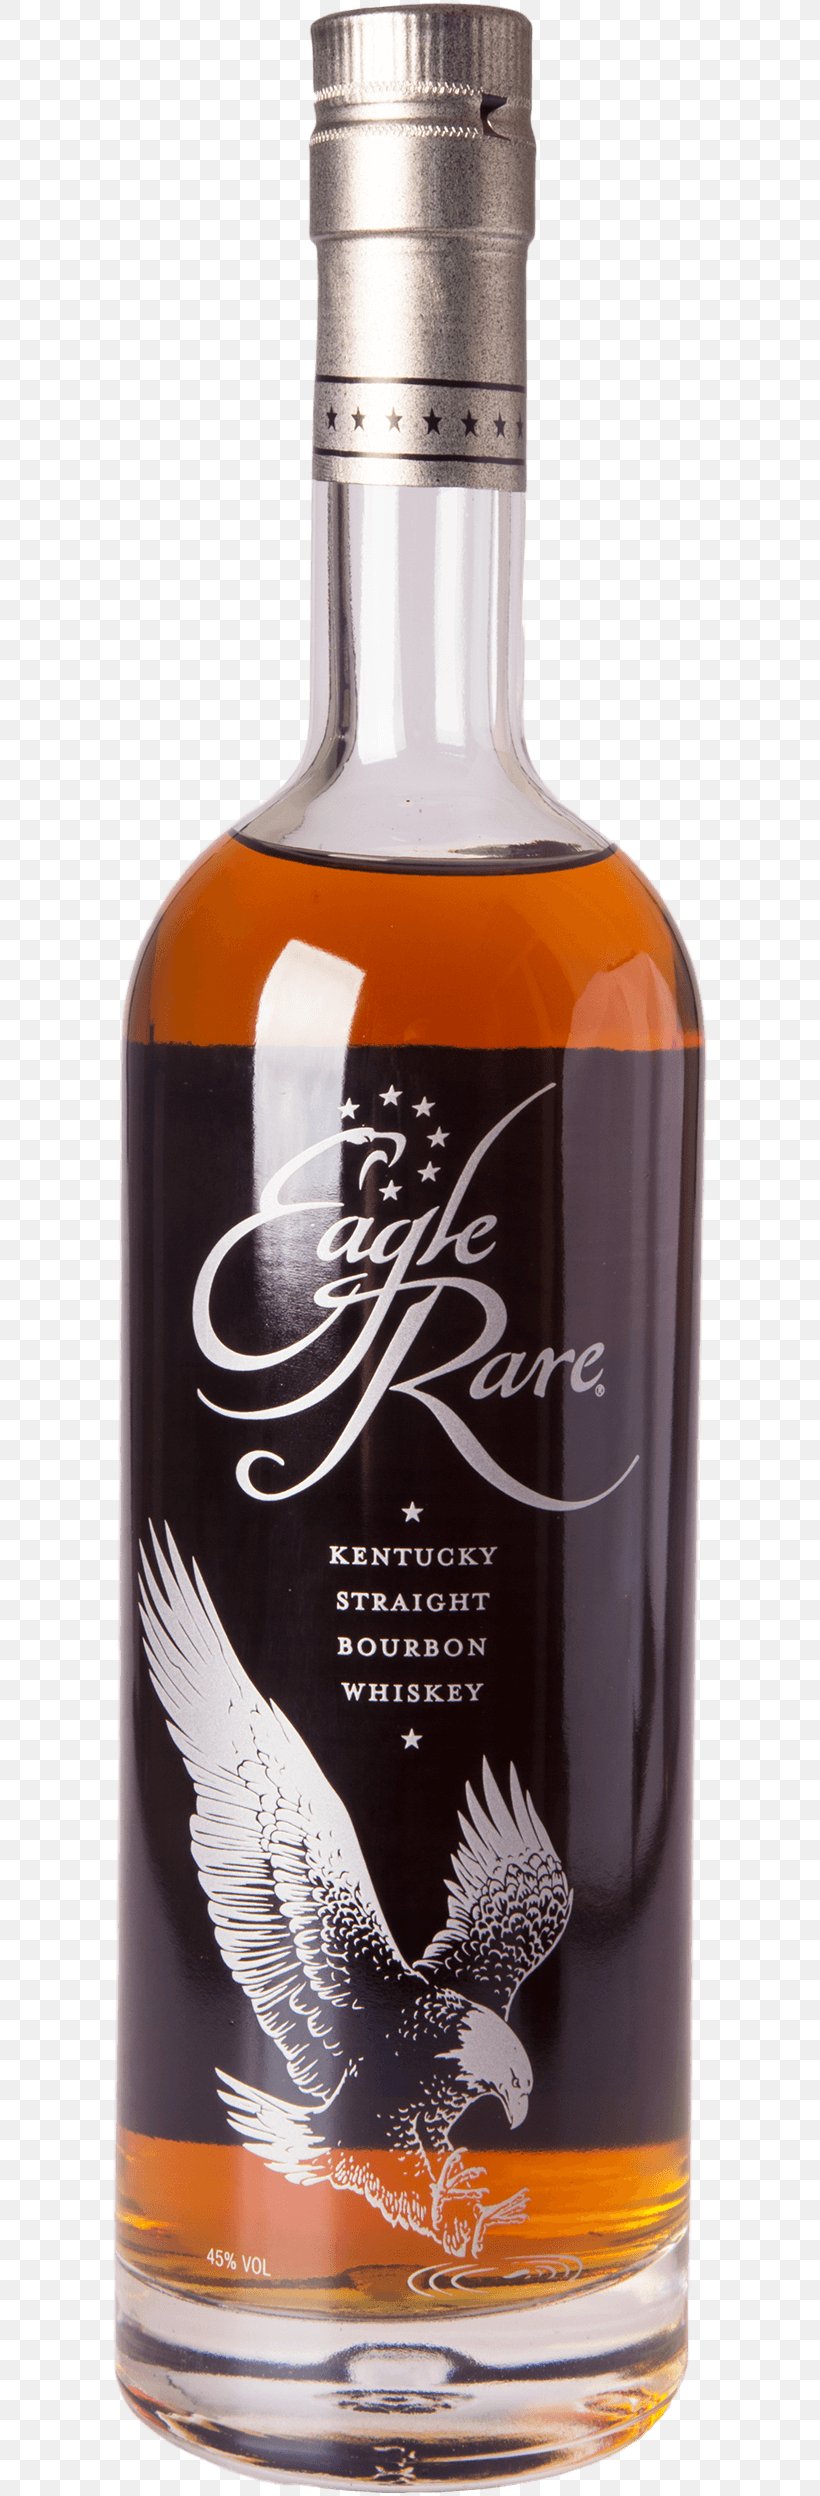 Tennessee Whiskey Eagle Rare Bourbon Whiskey Buffalo Trace Distillery, PNG, 600x2496px, Tennessee Whiskey, Alcoholic Beverage, Bottle, Bourbon Whiskey, Buffalo Trace Distillery Download Free